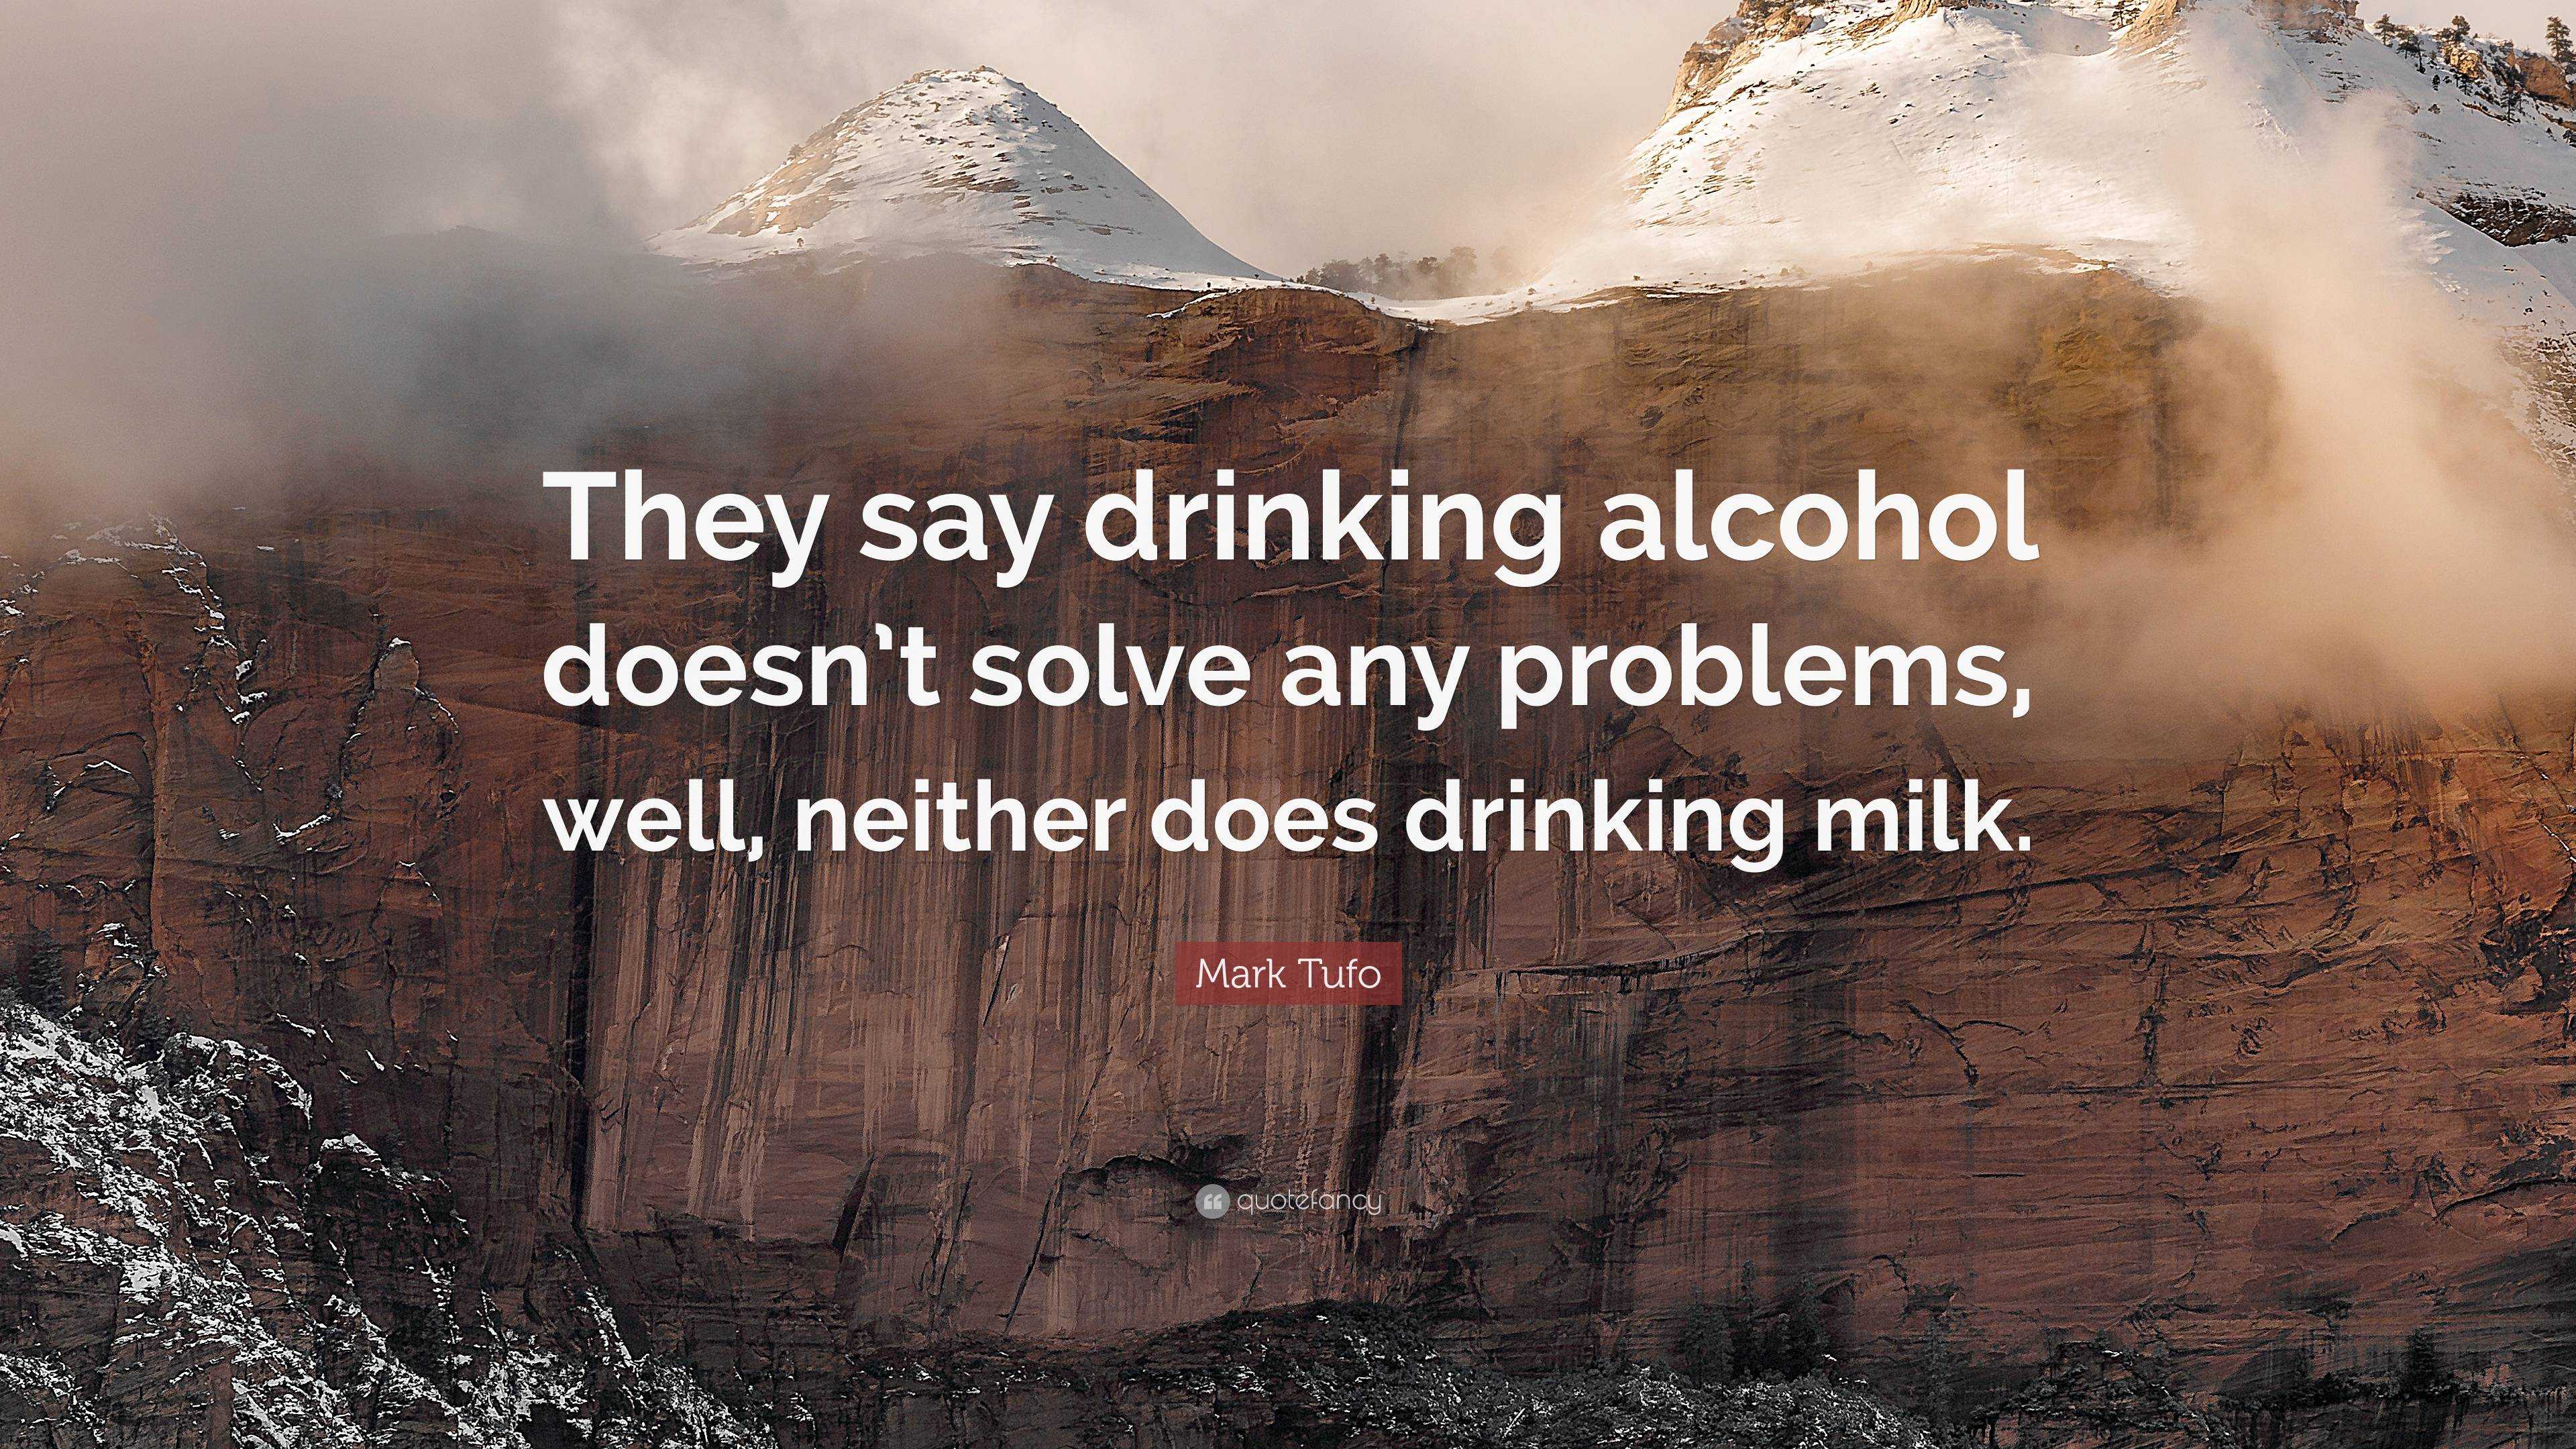 https://quotefancy.com/media/wallpaper/3840x2160/6525433-Mark-Tufo-Quote-They-say-drinking-alcohol-doesn-t-solve-any.jpg